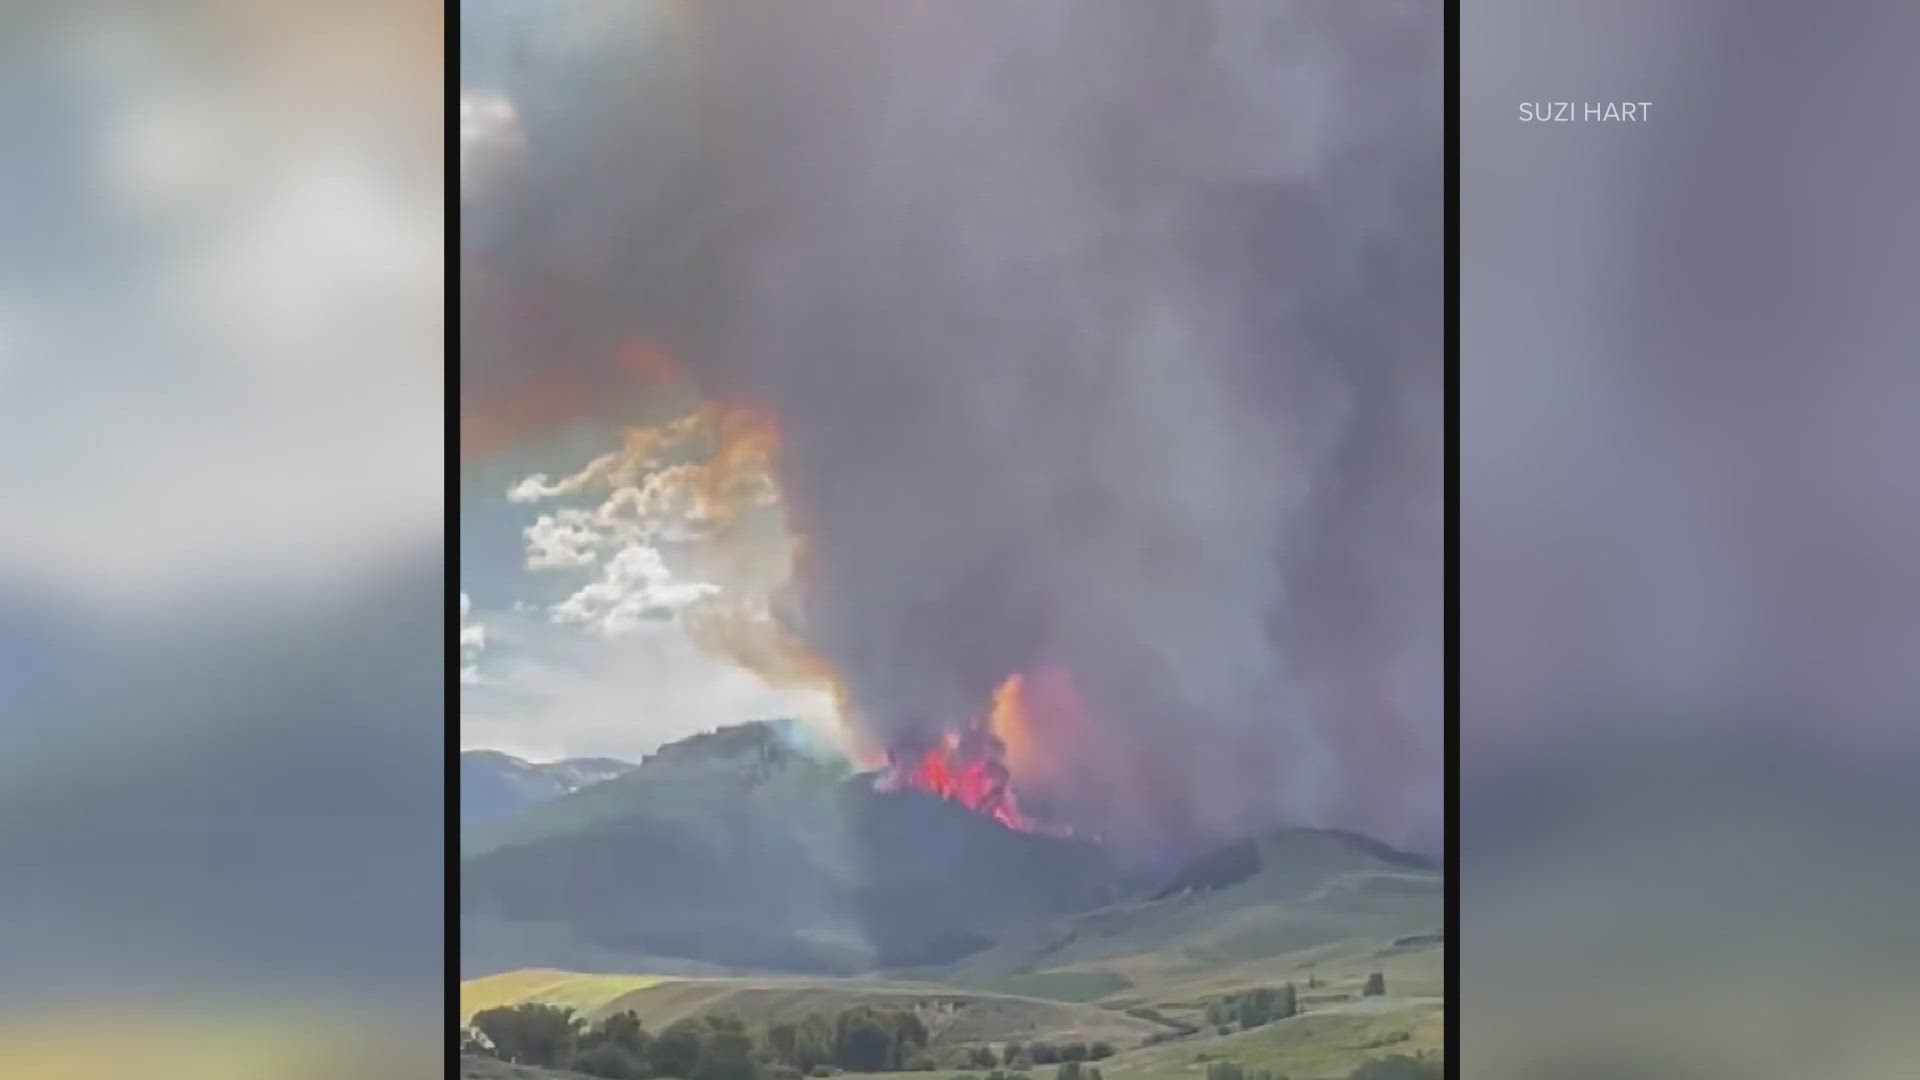 The Lowline Fire is burning on a 9,400-foot ridge between Gunnison and Crested Butte, the U.S. Forest Service said.